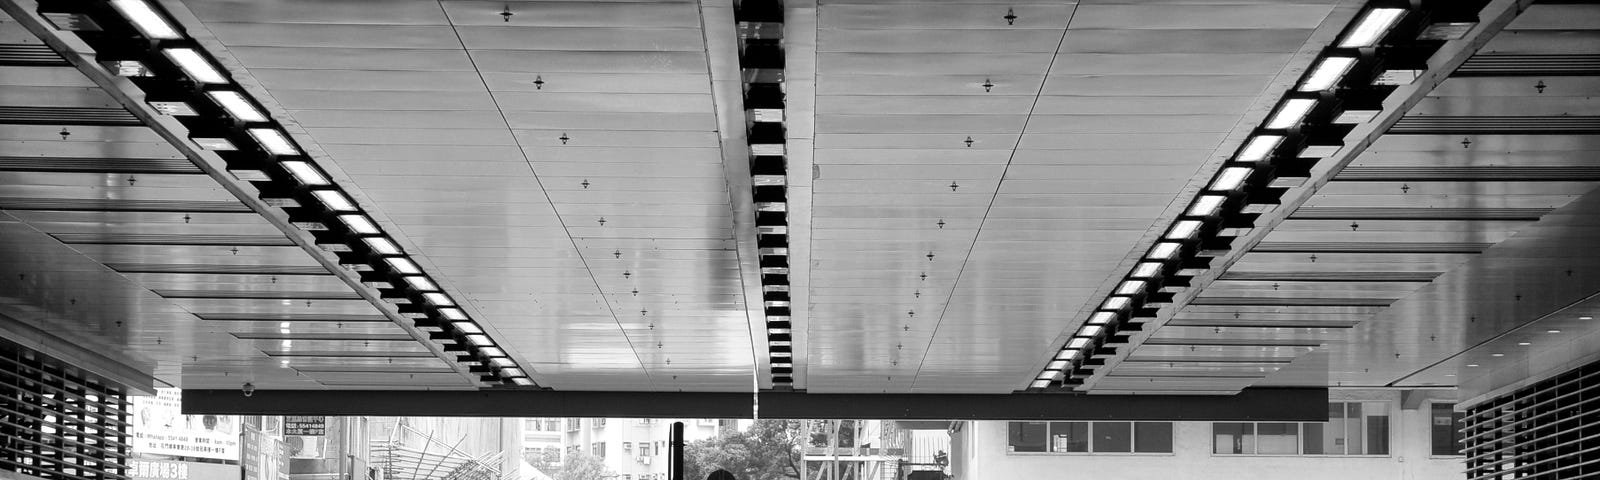 Black & White photo of the coverage of metal ceiling with illumination, viewing to the street far opposite.